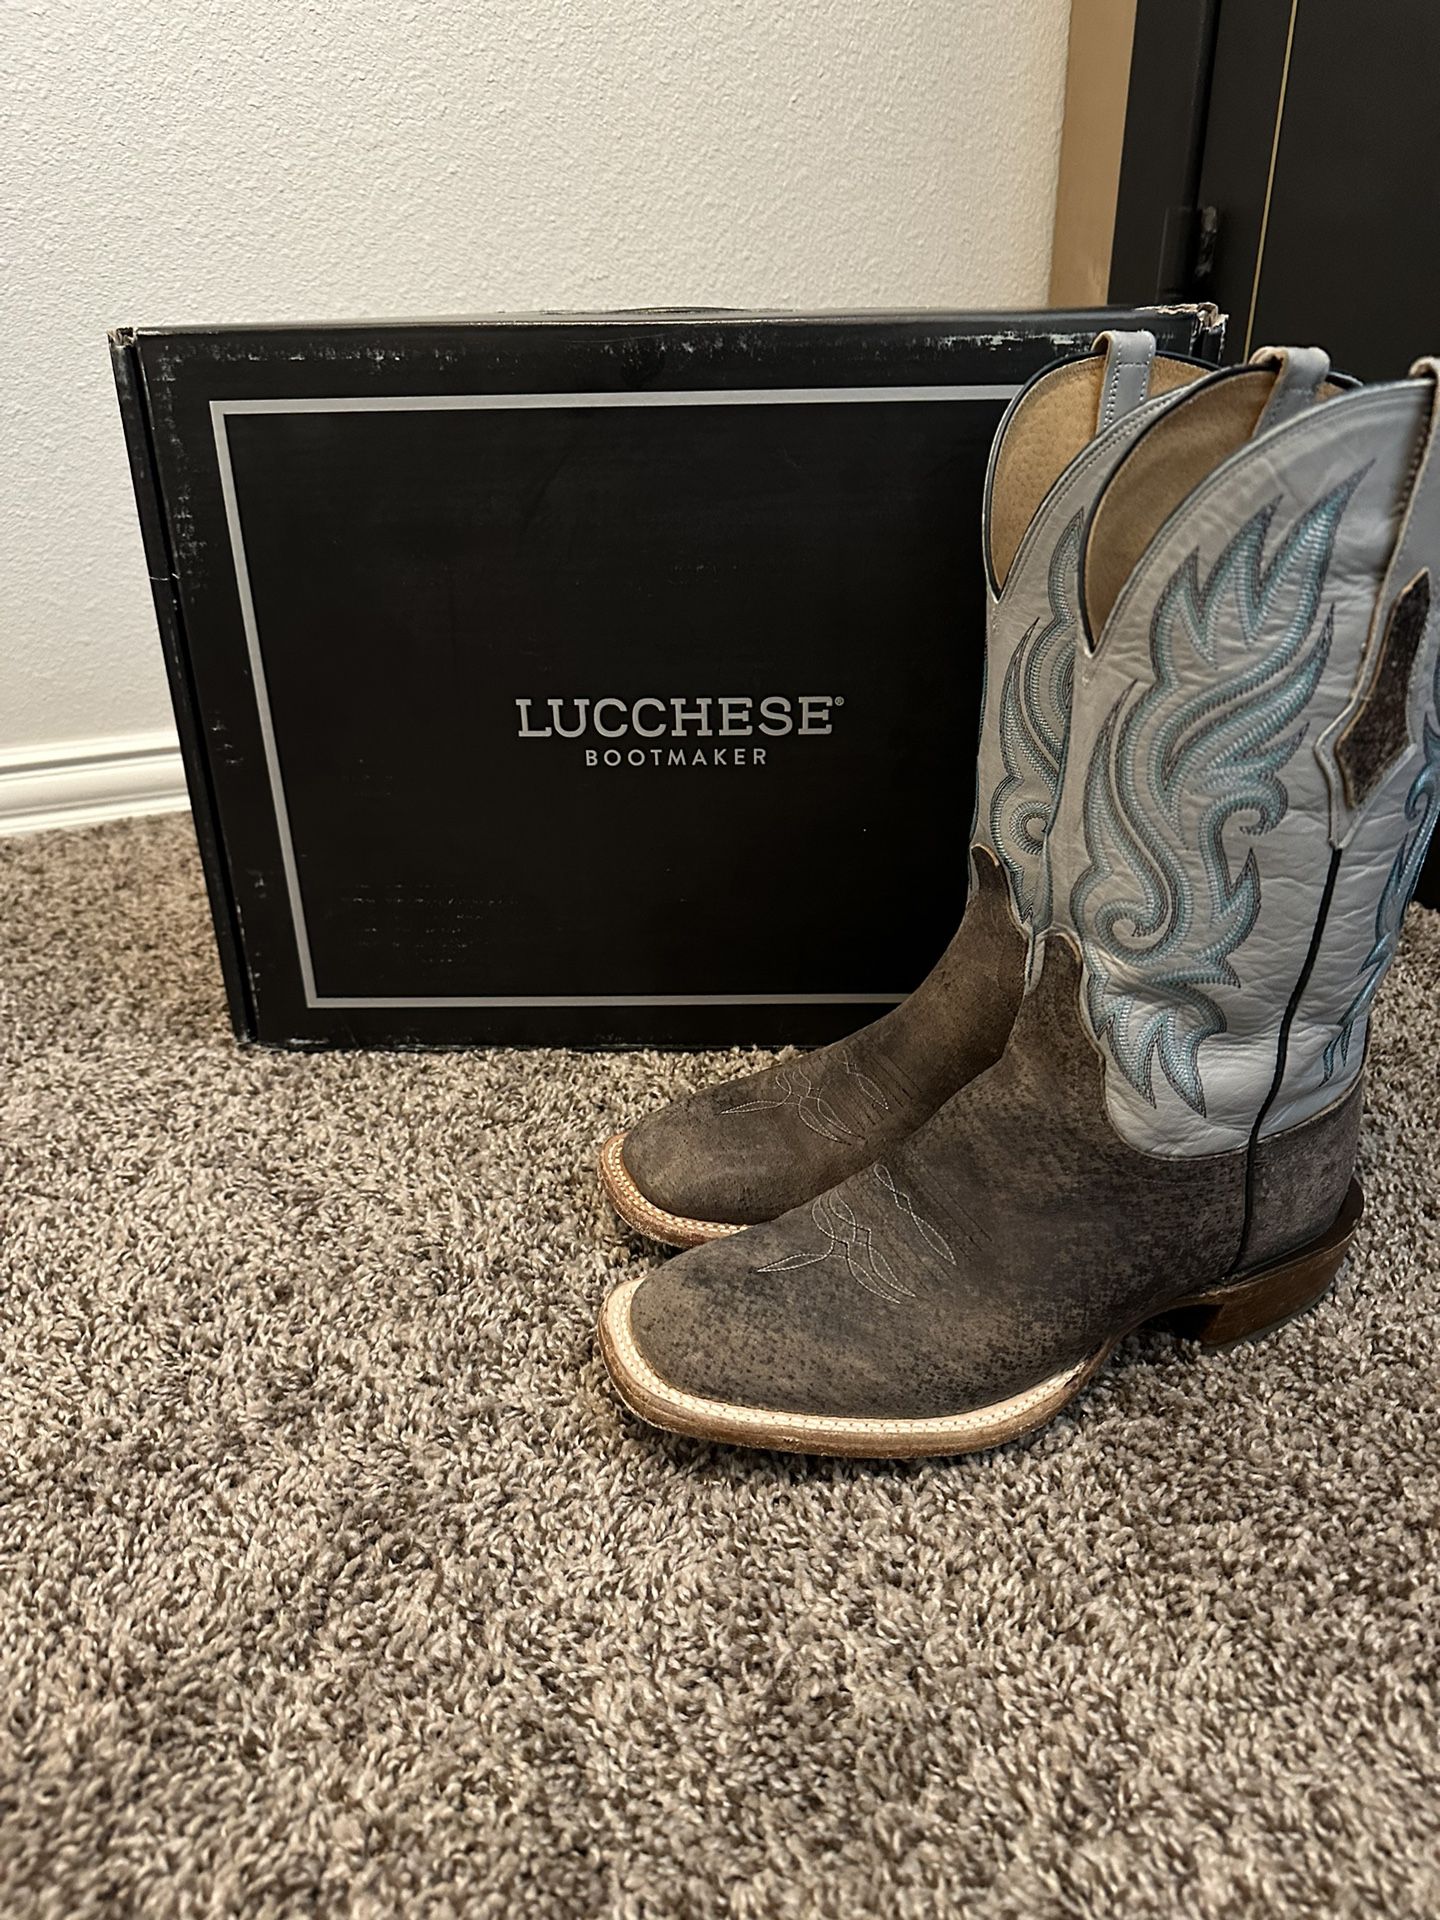 Lucchese Branson boot 8.5D